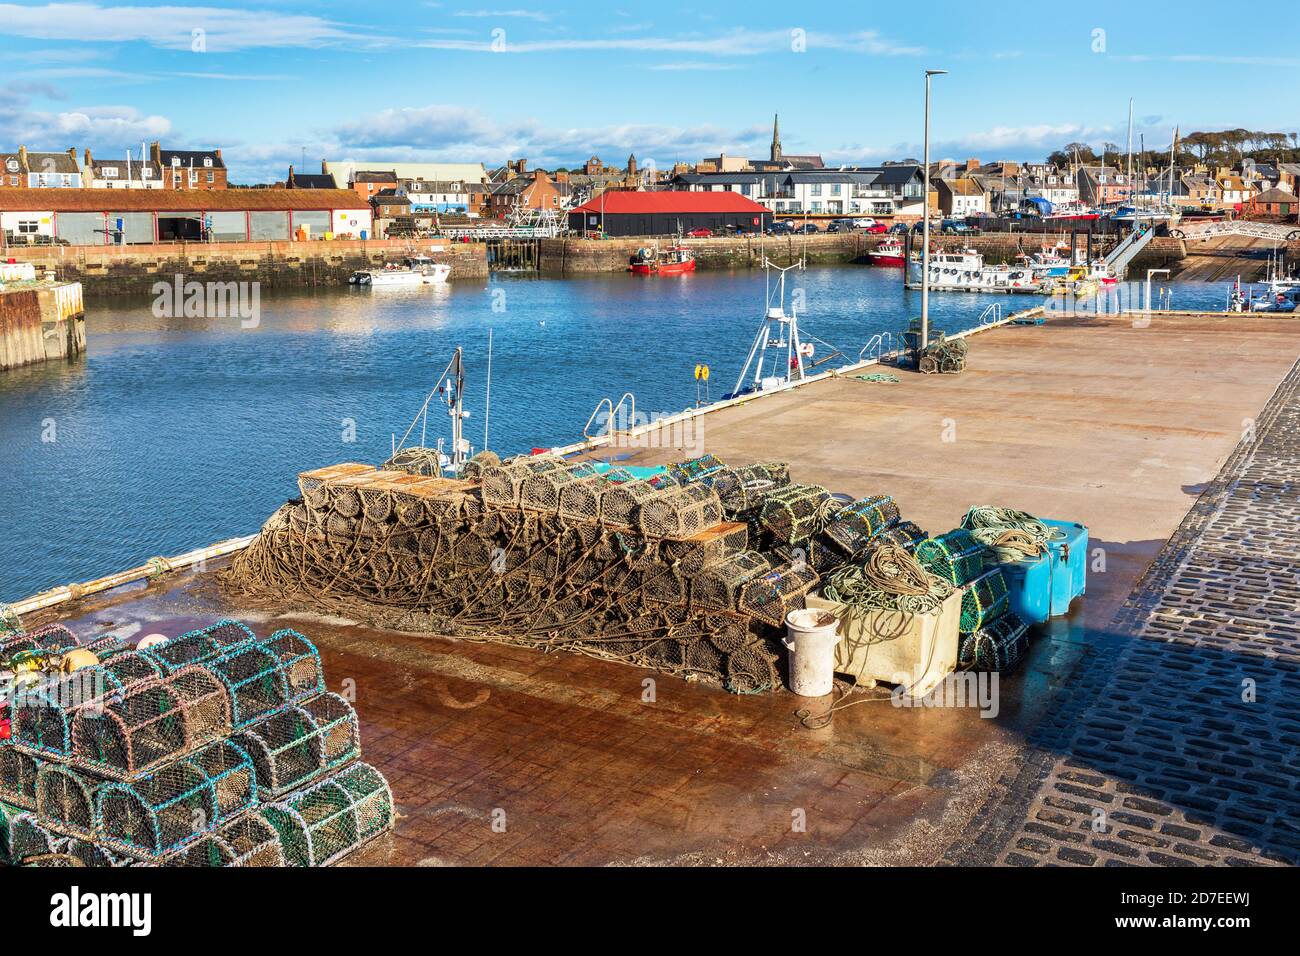 Arbroath harbour with lobster pots and a view to the fish market and town behind, Angus, Scotland, UK Stock Photo